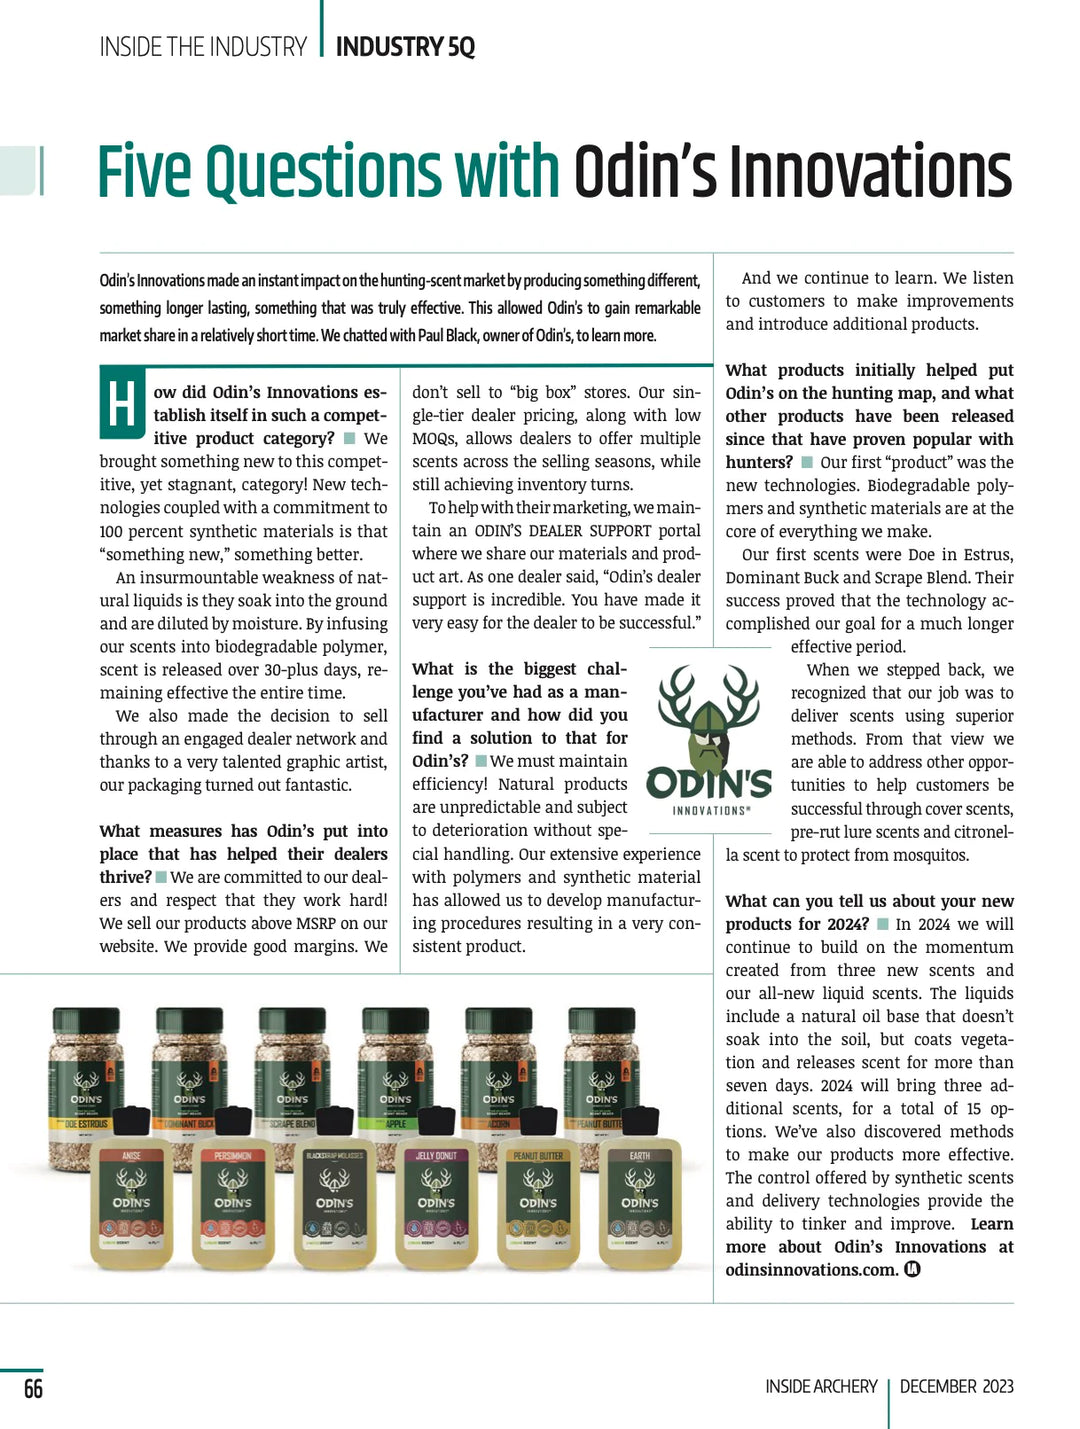 Inside Archery - Five Questions with Odin's Innovations